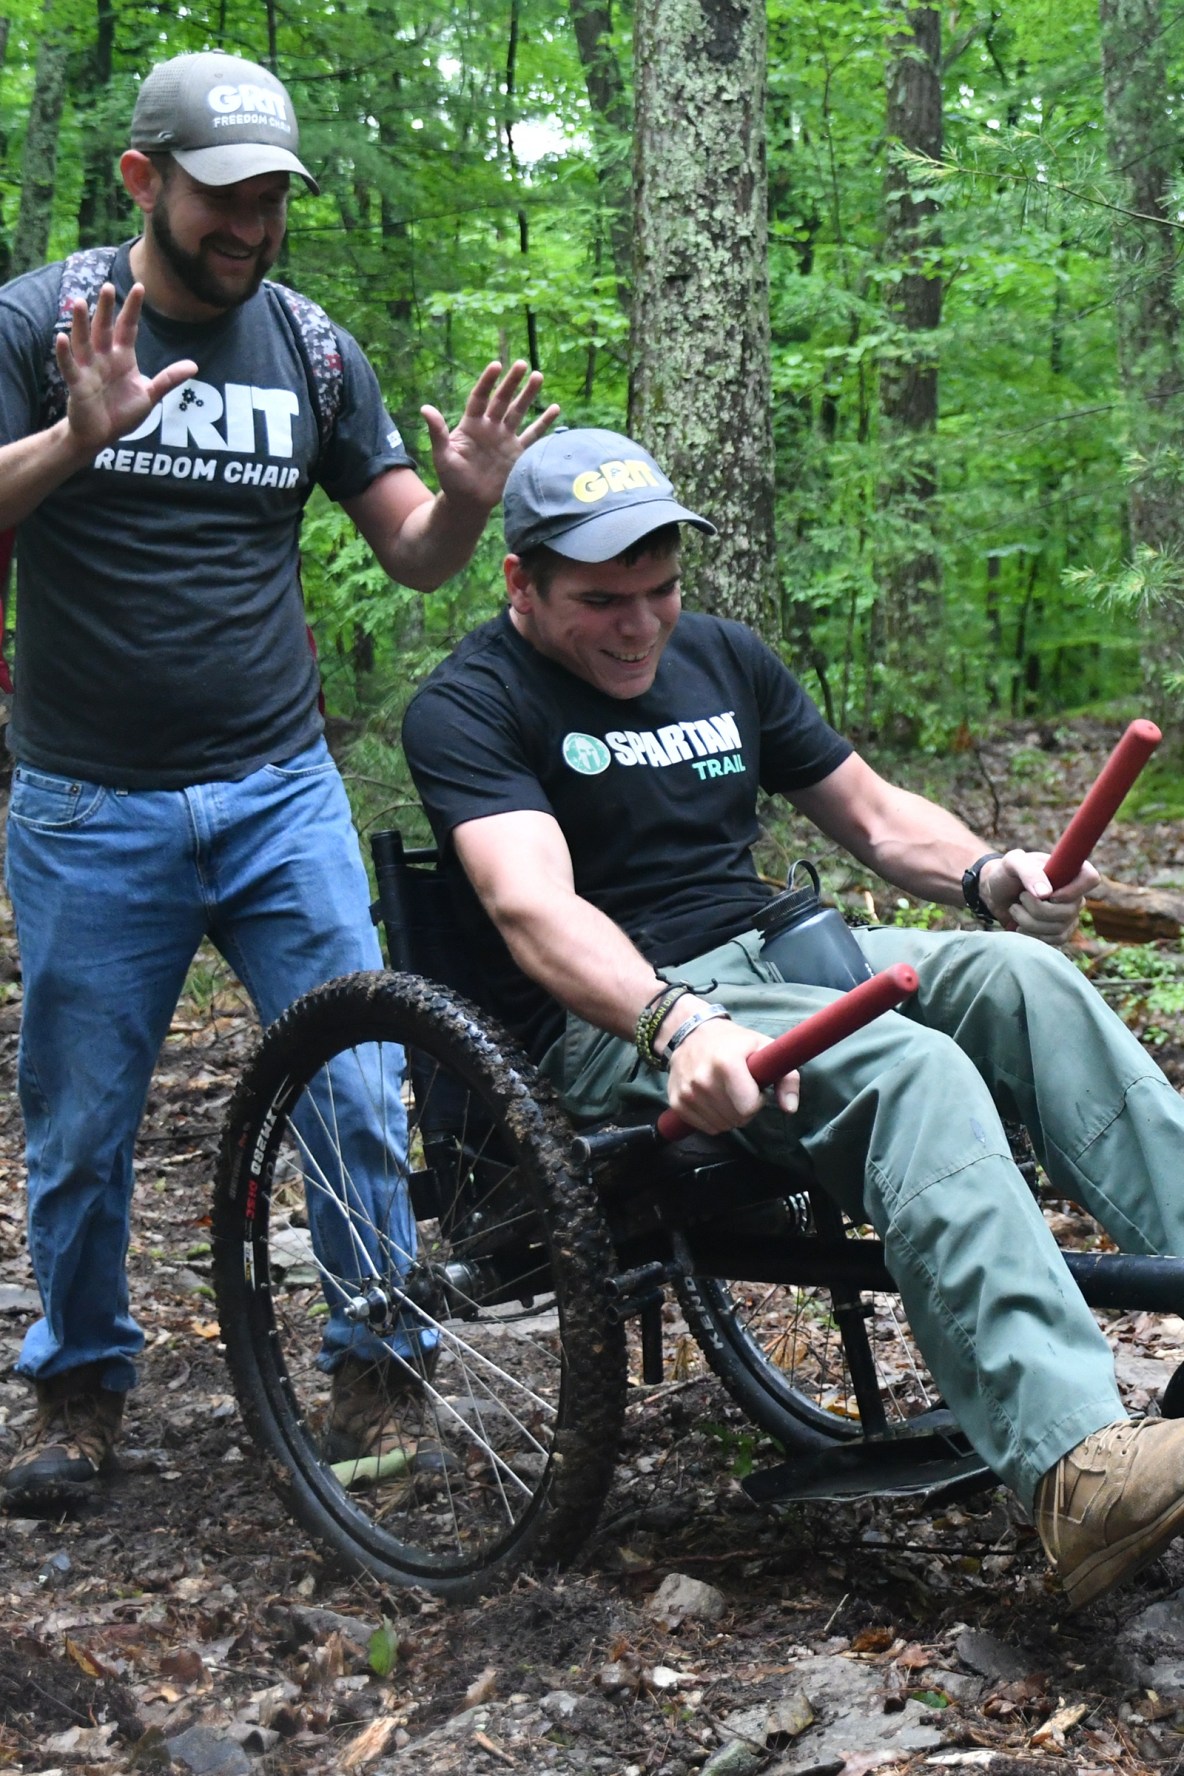 One guest doing adaptive hiking with Grit Freedom Chair in the forest.